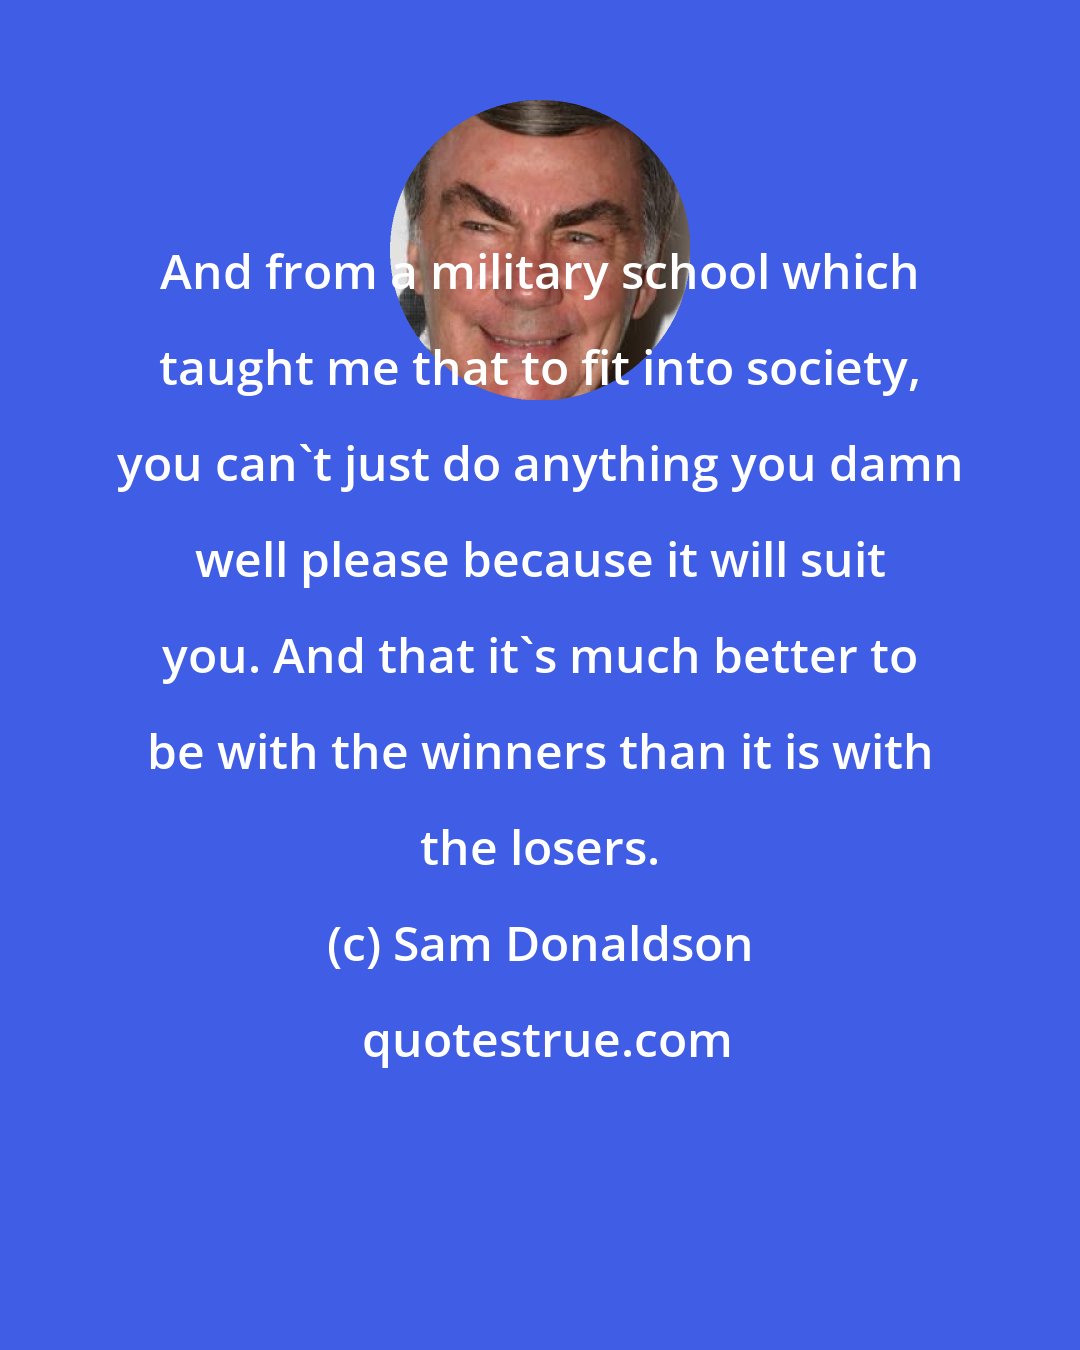 Sam Donaldson: And from a military school which taught me that to fit into society, you can't just do anything you damn well please because it will suit you. And that it's much better to be with the winners than it is with the losers.